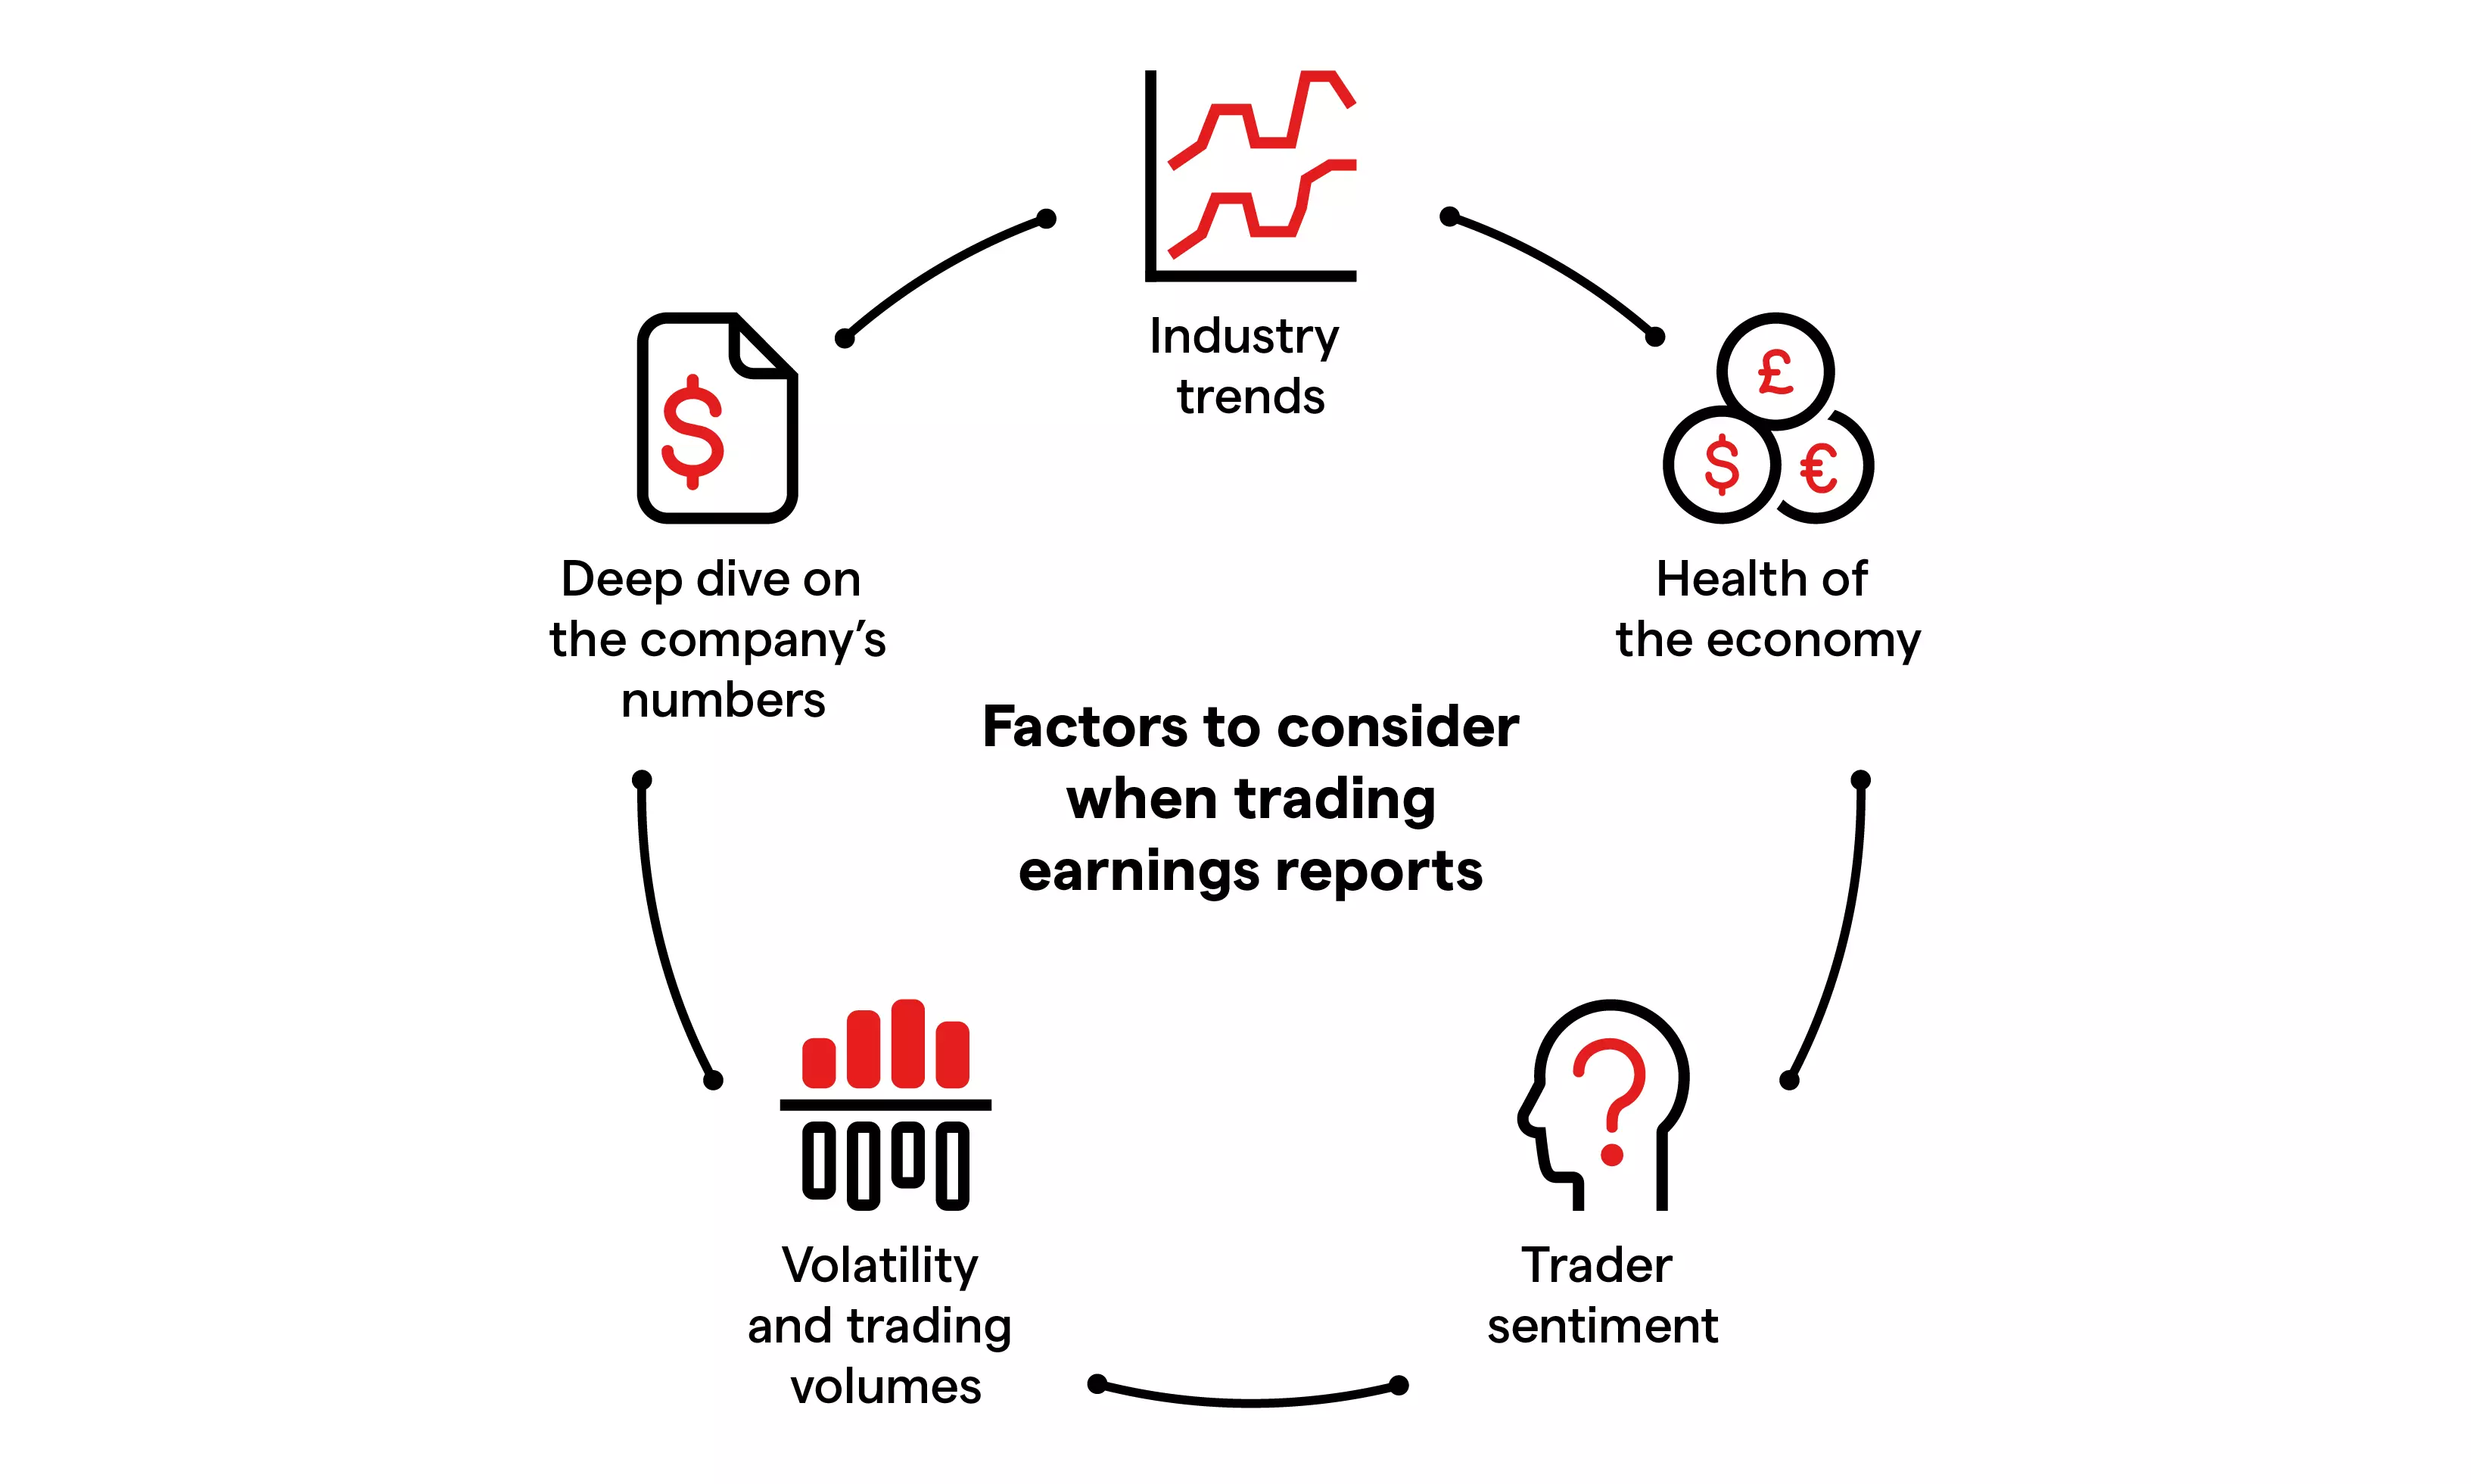 Factors to consider when trading earnings reports